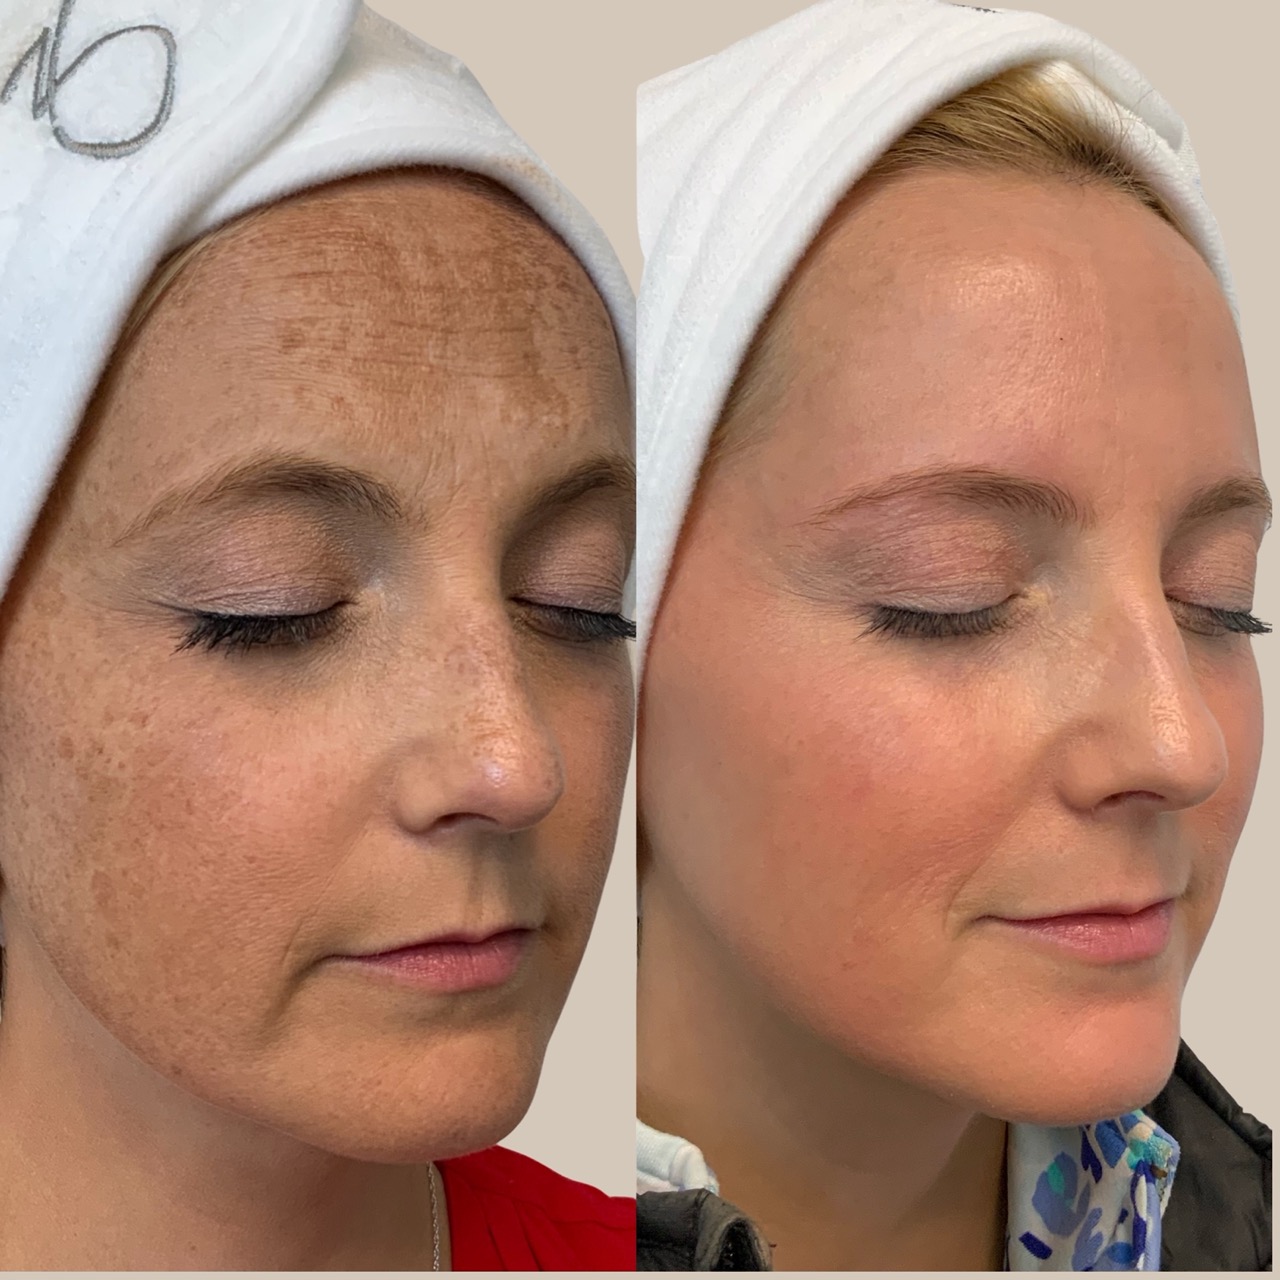 Before and after ZO Skin Health regimen